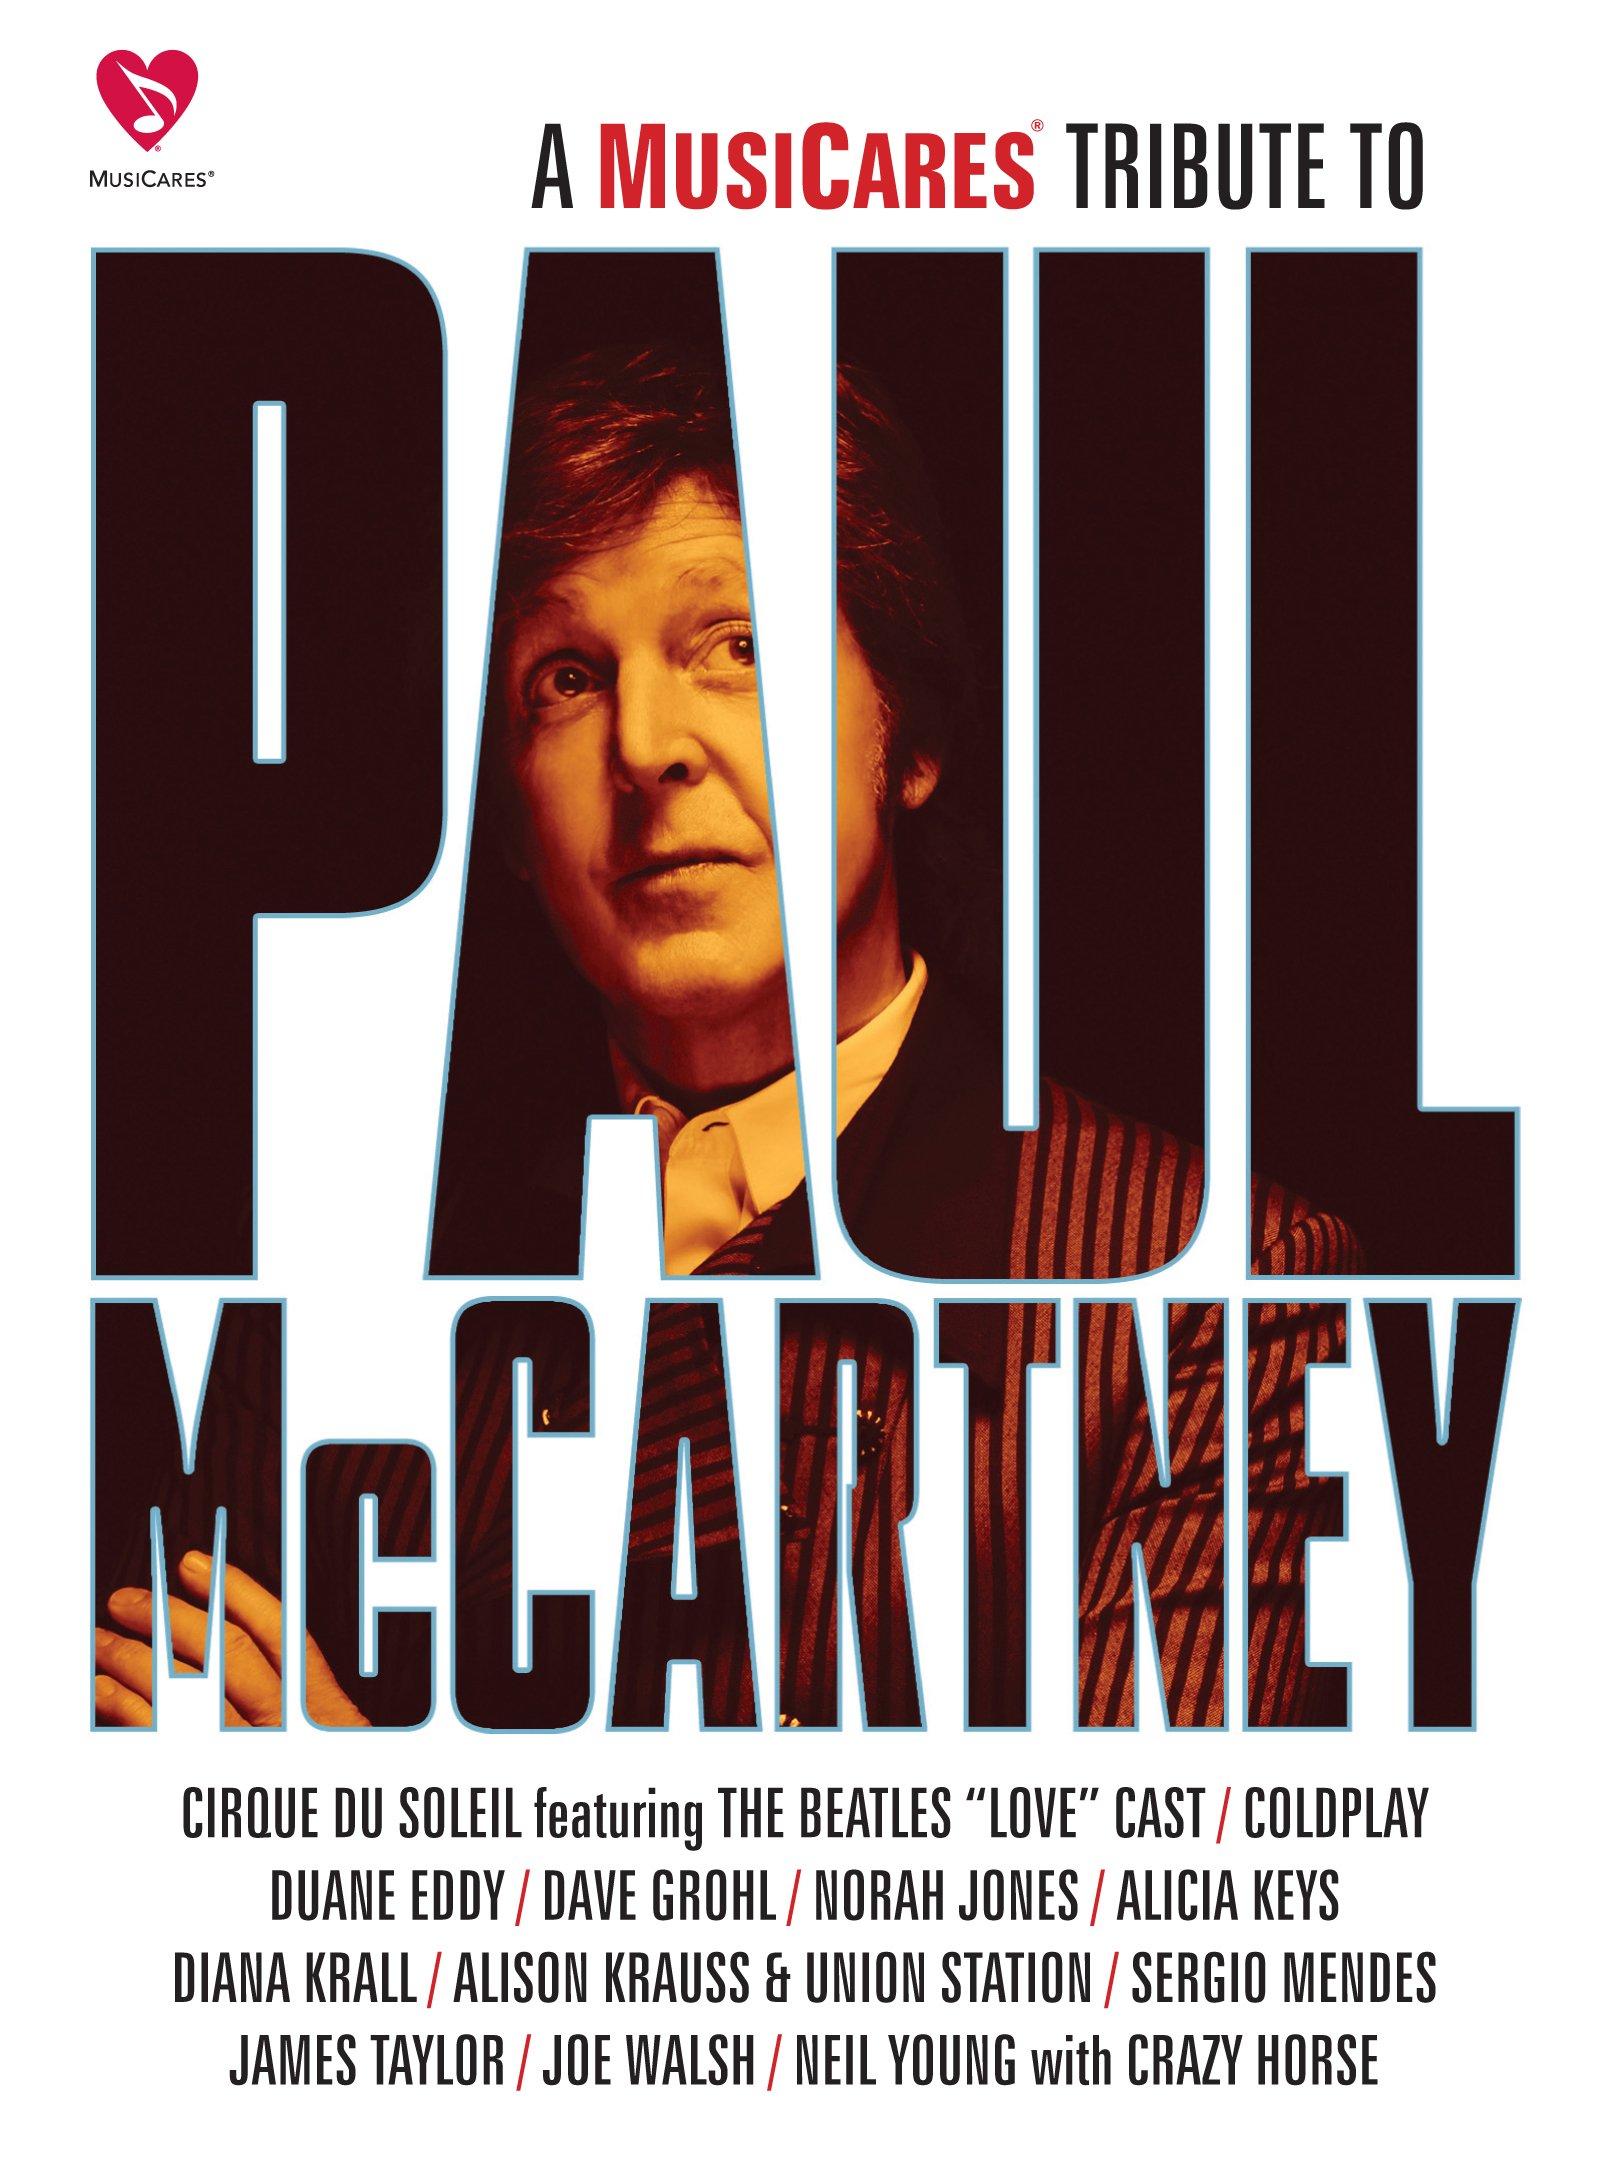 A MusiCares Tribute To Paul McCartney Coming To Blu-ray, DVD GRAMMY image image